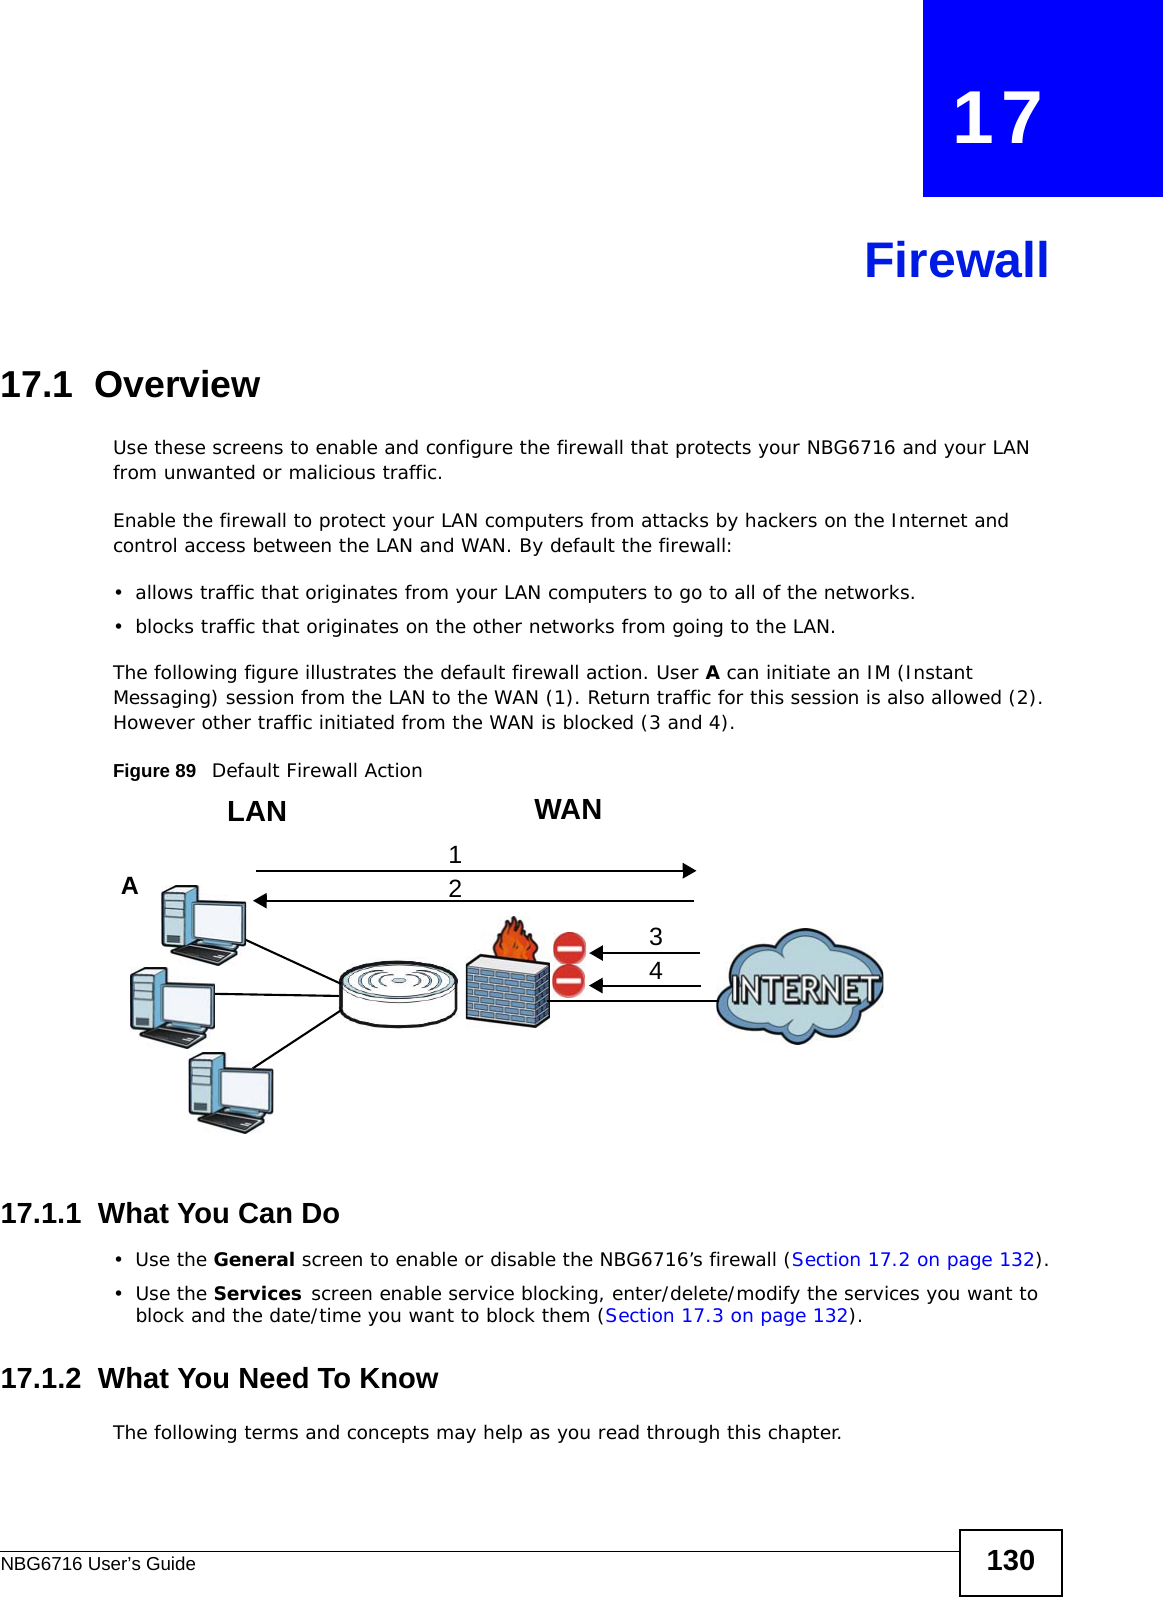 NBG6716 User’s Guide 130CHAPTER   17Firewall17.1  Overview   Use these screens to enable and configure the firewall that protects your NBG6716 and your LAN from unwanted or malicious traffic.Enable the firewall to protect your LAN computers from attacks by hackers on the Internet and control access between the LAN and WAN. By default the firewall:• allows traffic that originates from your LAN computers to go to all of the networks. • blocks traffic that originates on the other networks from going to the LAN. The following figure illustrates the default firewall action. User A can initiate an IM (Instant Messaging) session from the LAN to the WAN (1). Return traffic for this session is also allowed (2). However other traffic initiated from the WAN is blocked (3 and 4).Figure 89   Default Firewall Action17.1.1  What You Can Do•Use the General screen to enable or disable the NBG6716’s firewall (Section 17.2 on page 132).•Use the Services screen enable service blocking, enter/delete/modify the services you want to block and the date/time you want to block them (Section 17.3 on page 132).17.1.2  What You Need To KnowThe following terms and concepts may help as you read through this chapter.WANLAN3412A